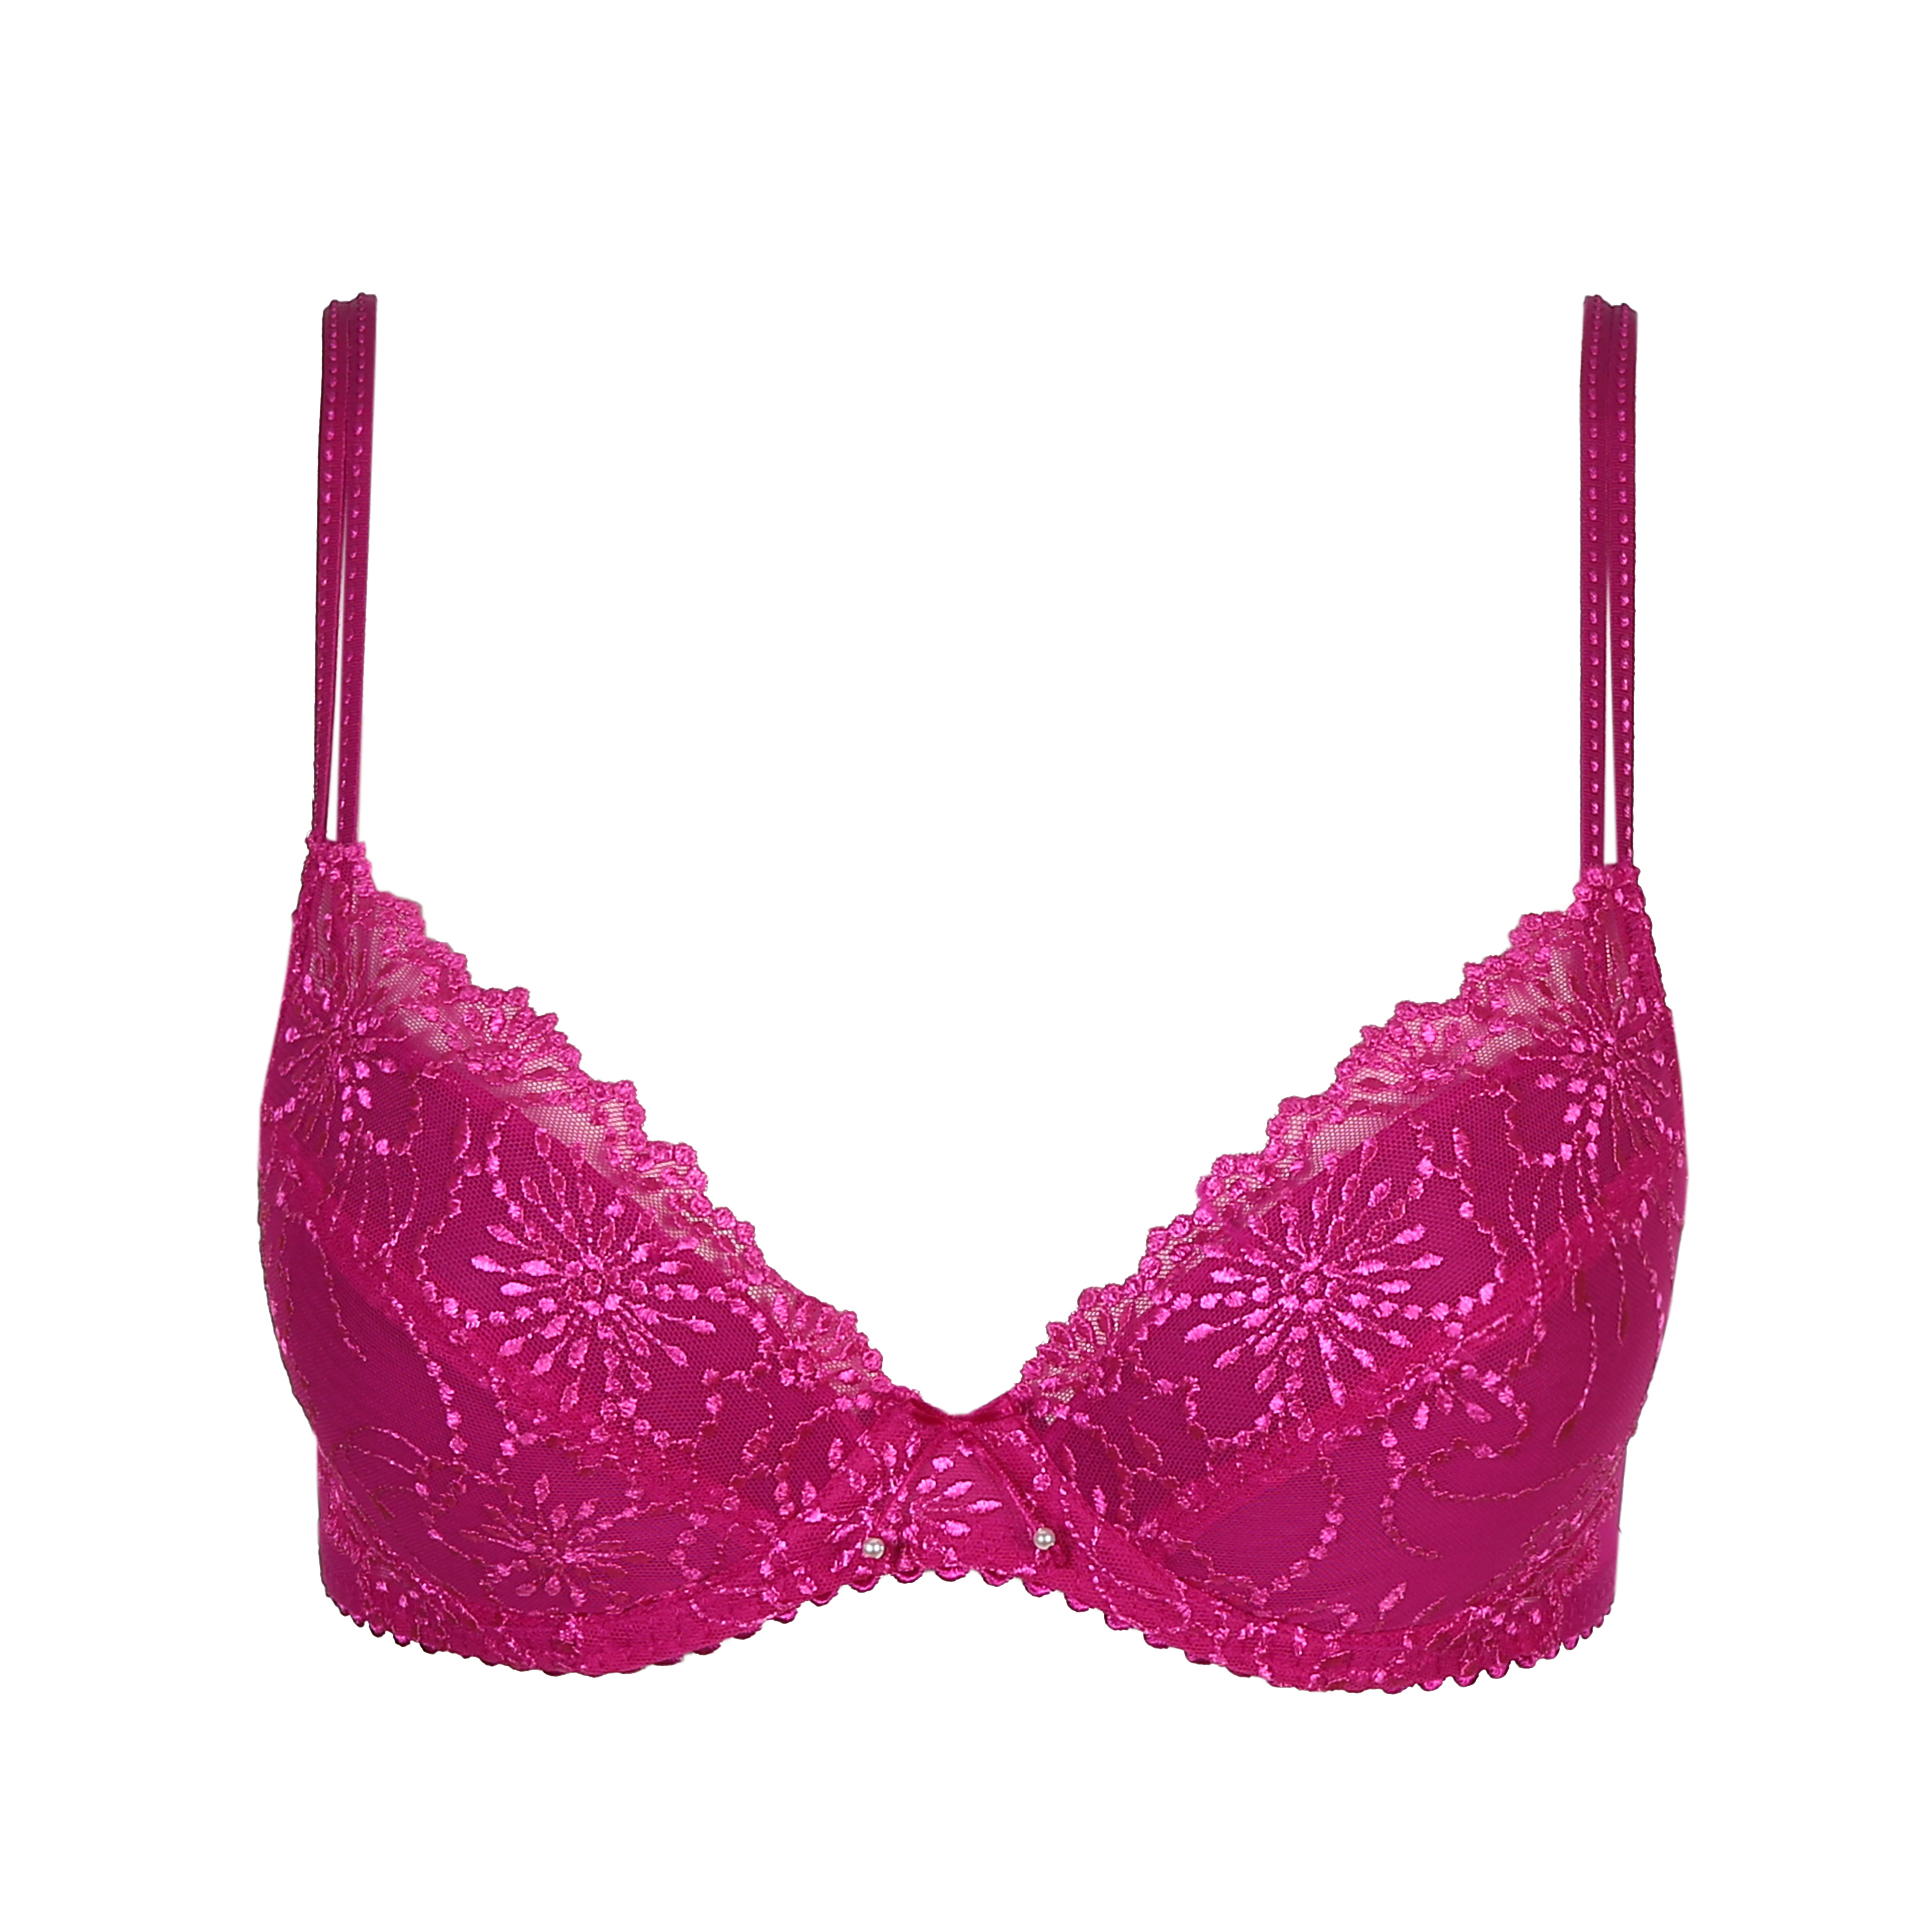 Marie Jo Jane Wild Rose Push Up Bra Removable Pads Rigby And Peller